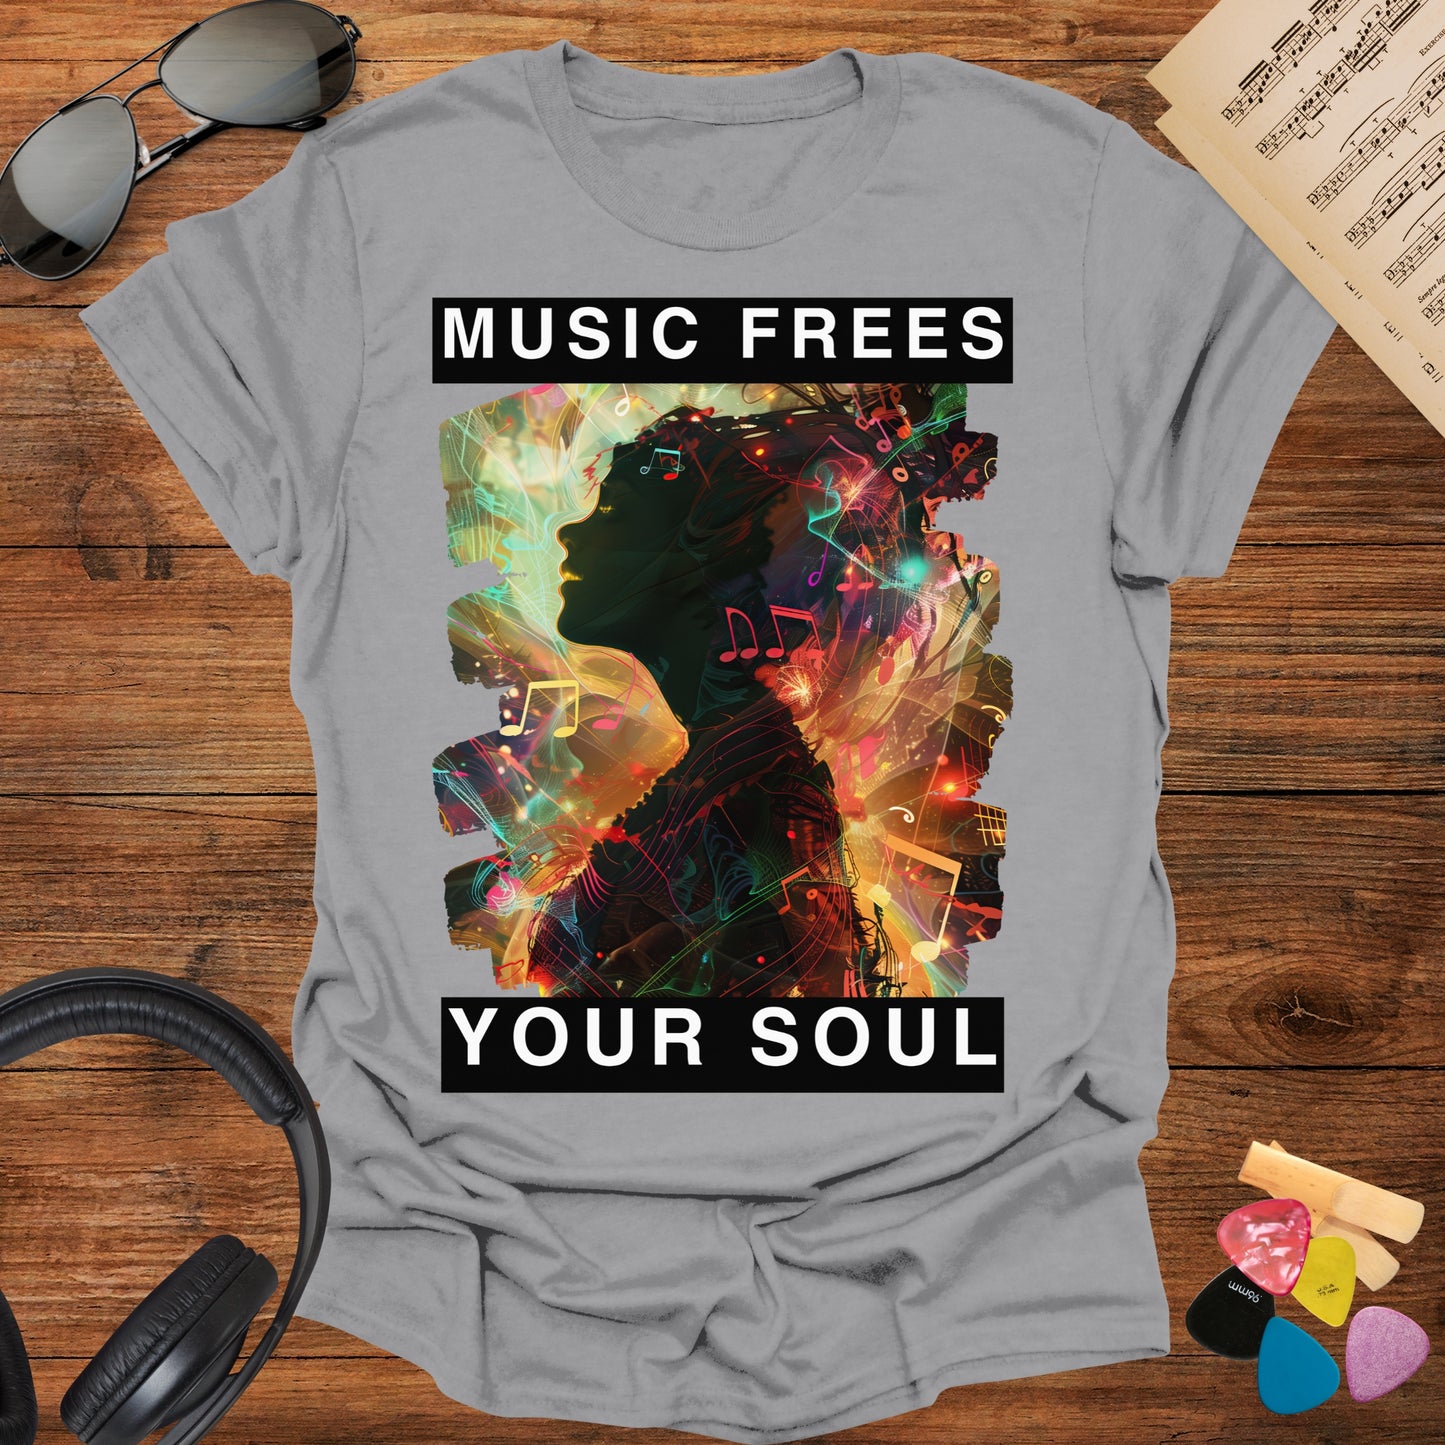 Music Frees Your Soul T-shirt